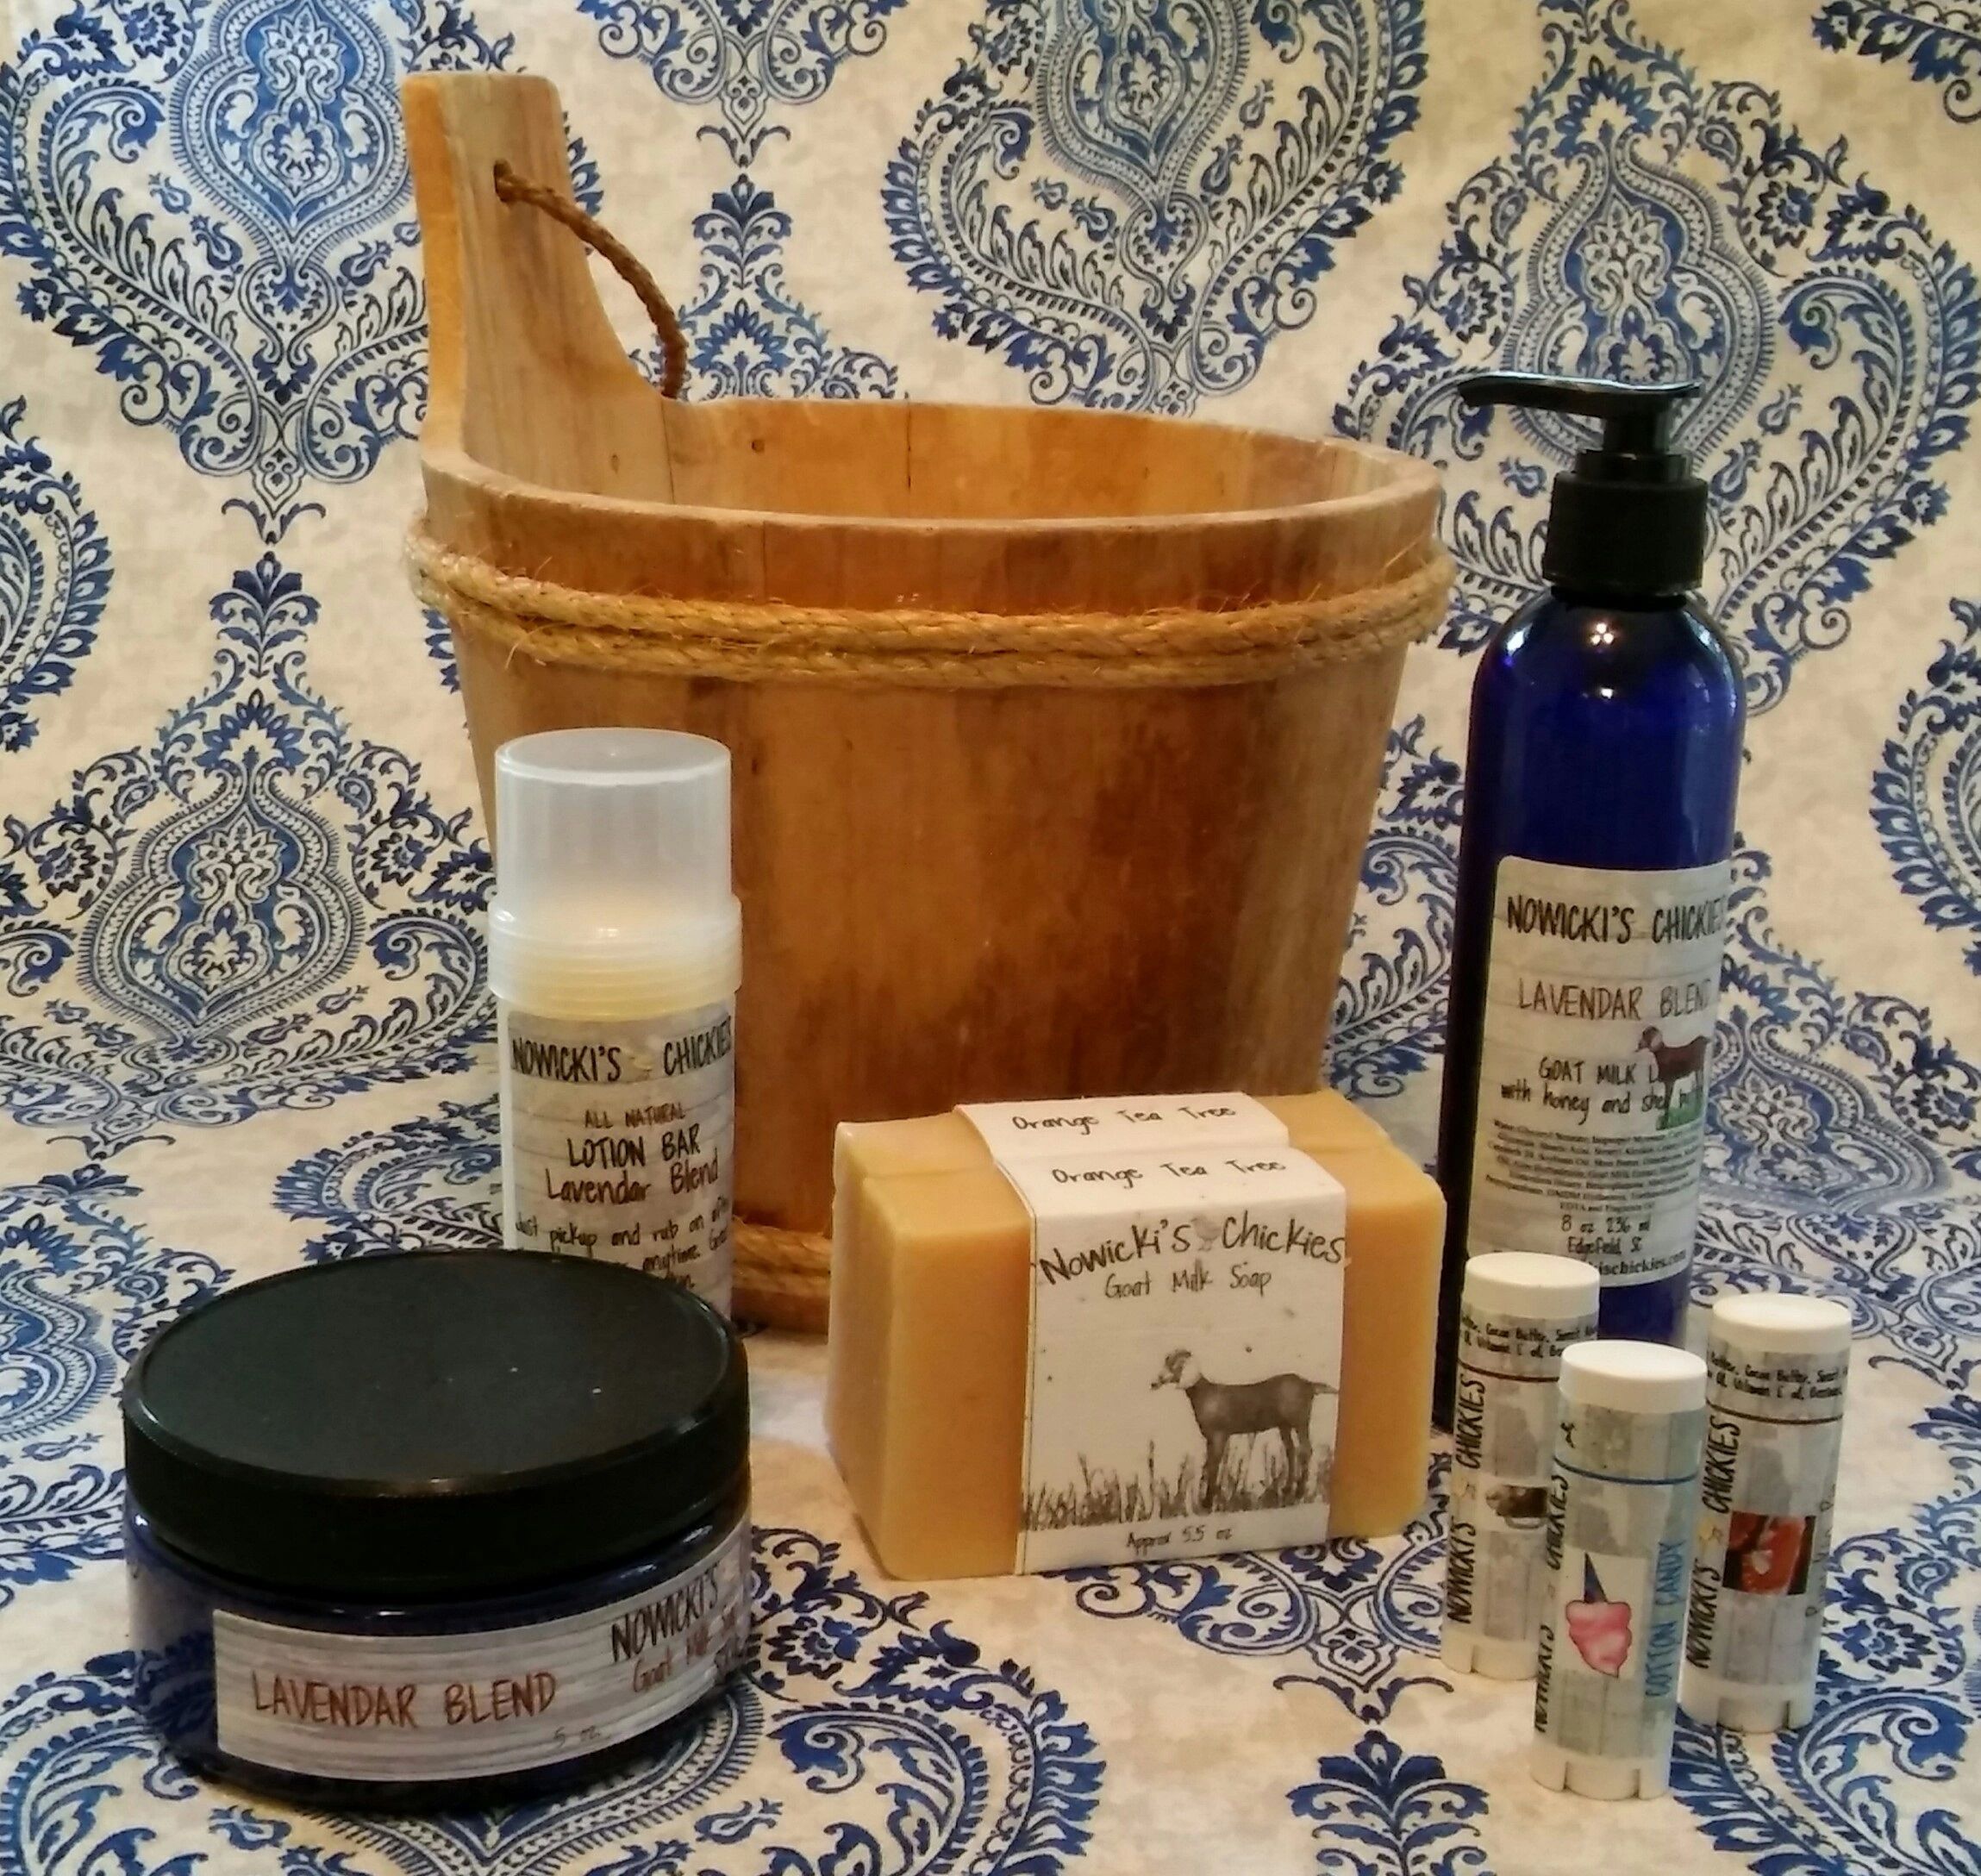 Handmade natural goat milk soap and lotion
